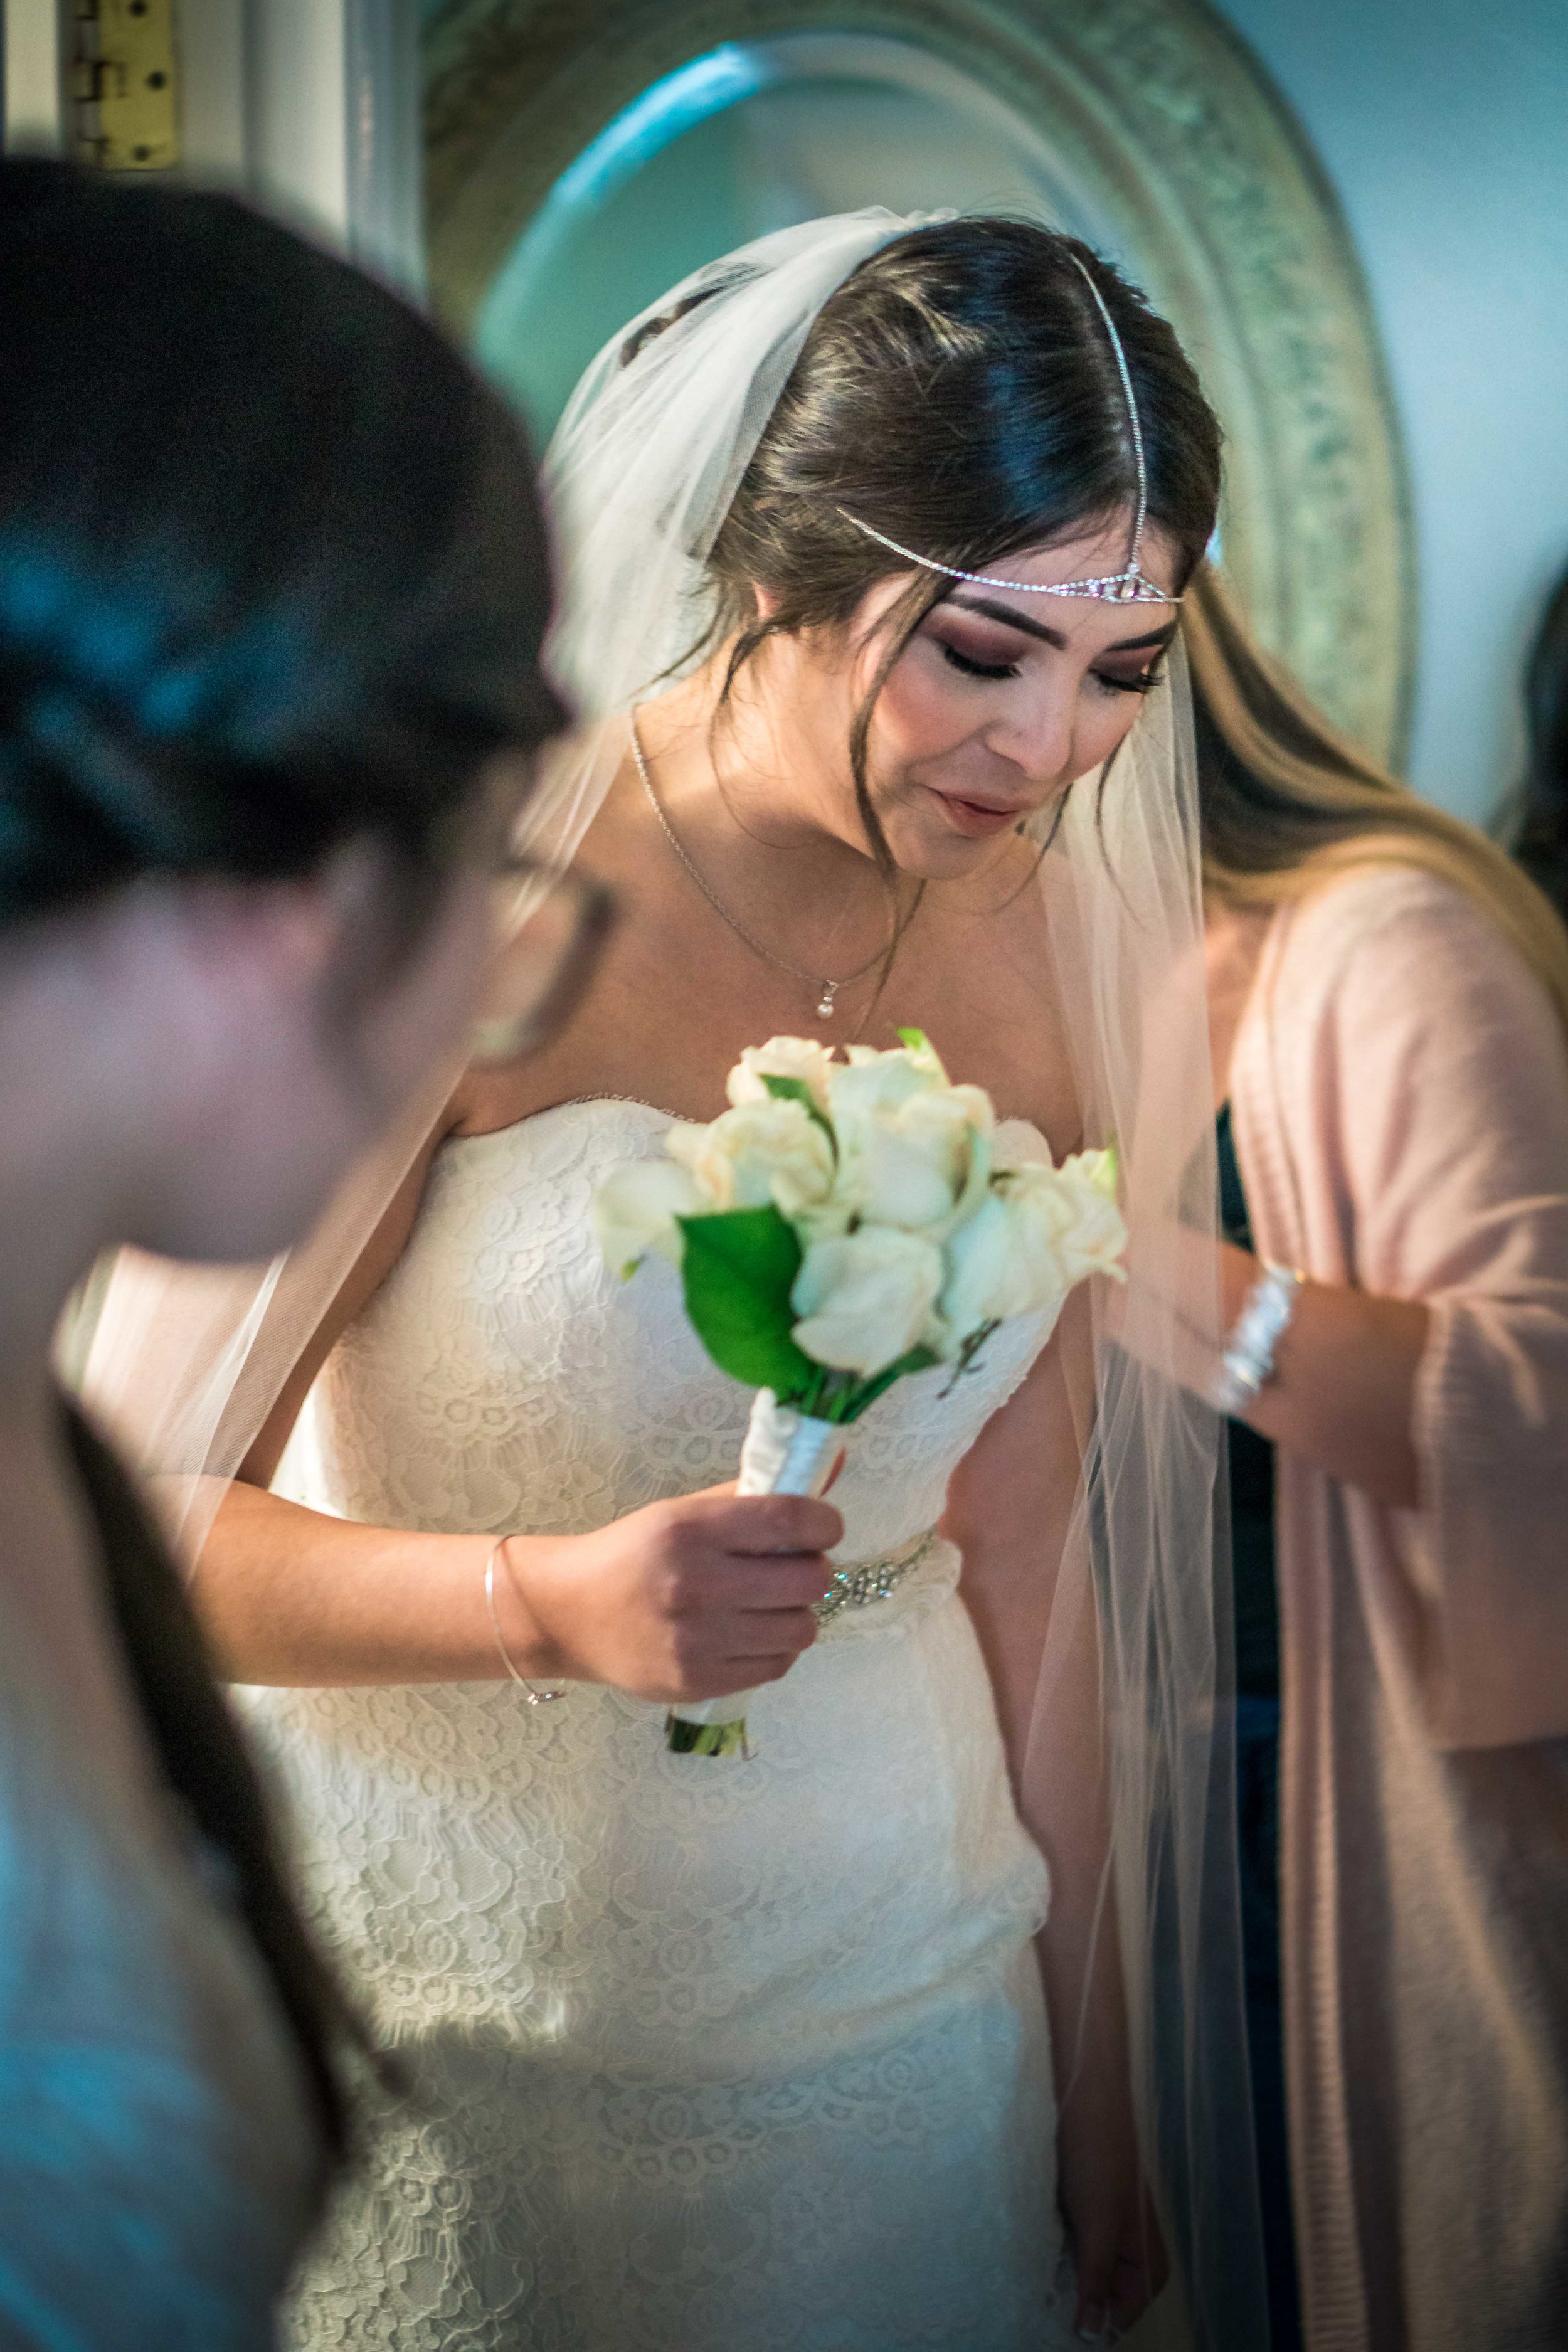 Bride with your bouquet in her wedding dress been helped by her mother and sister